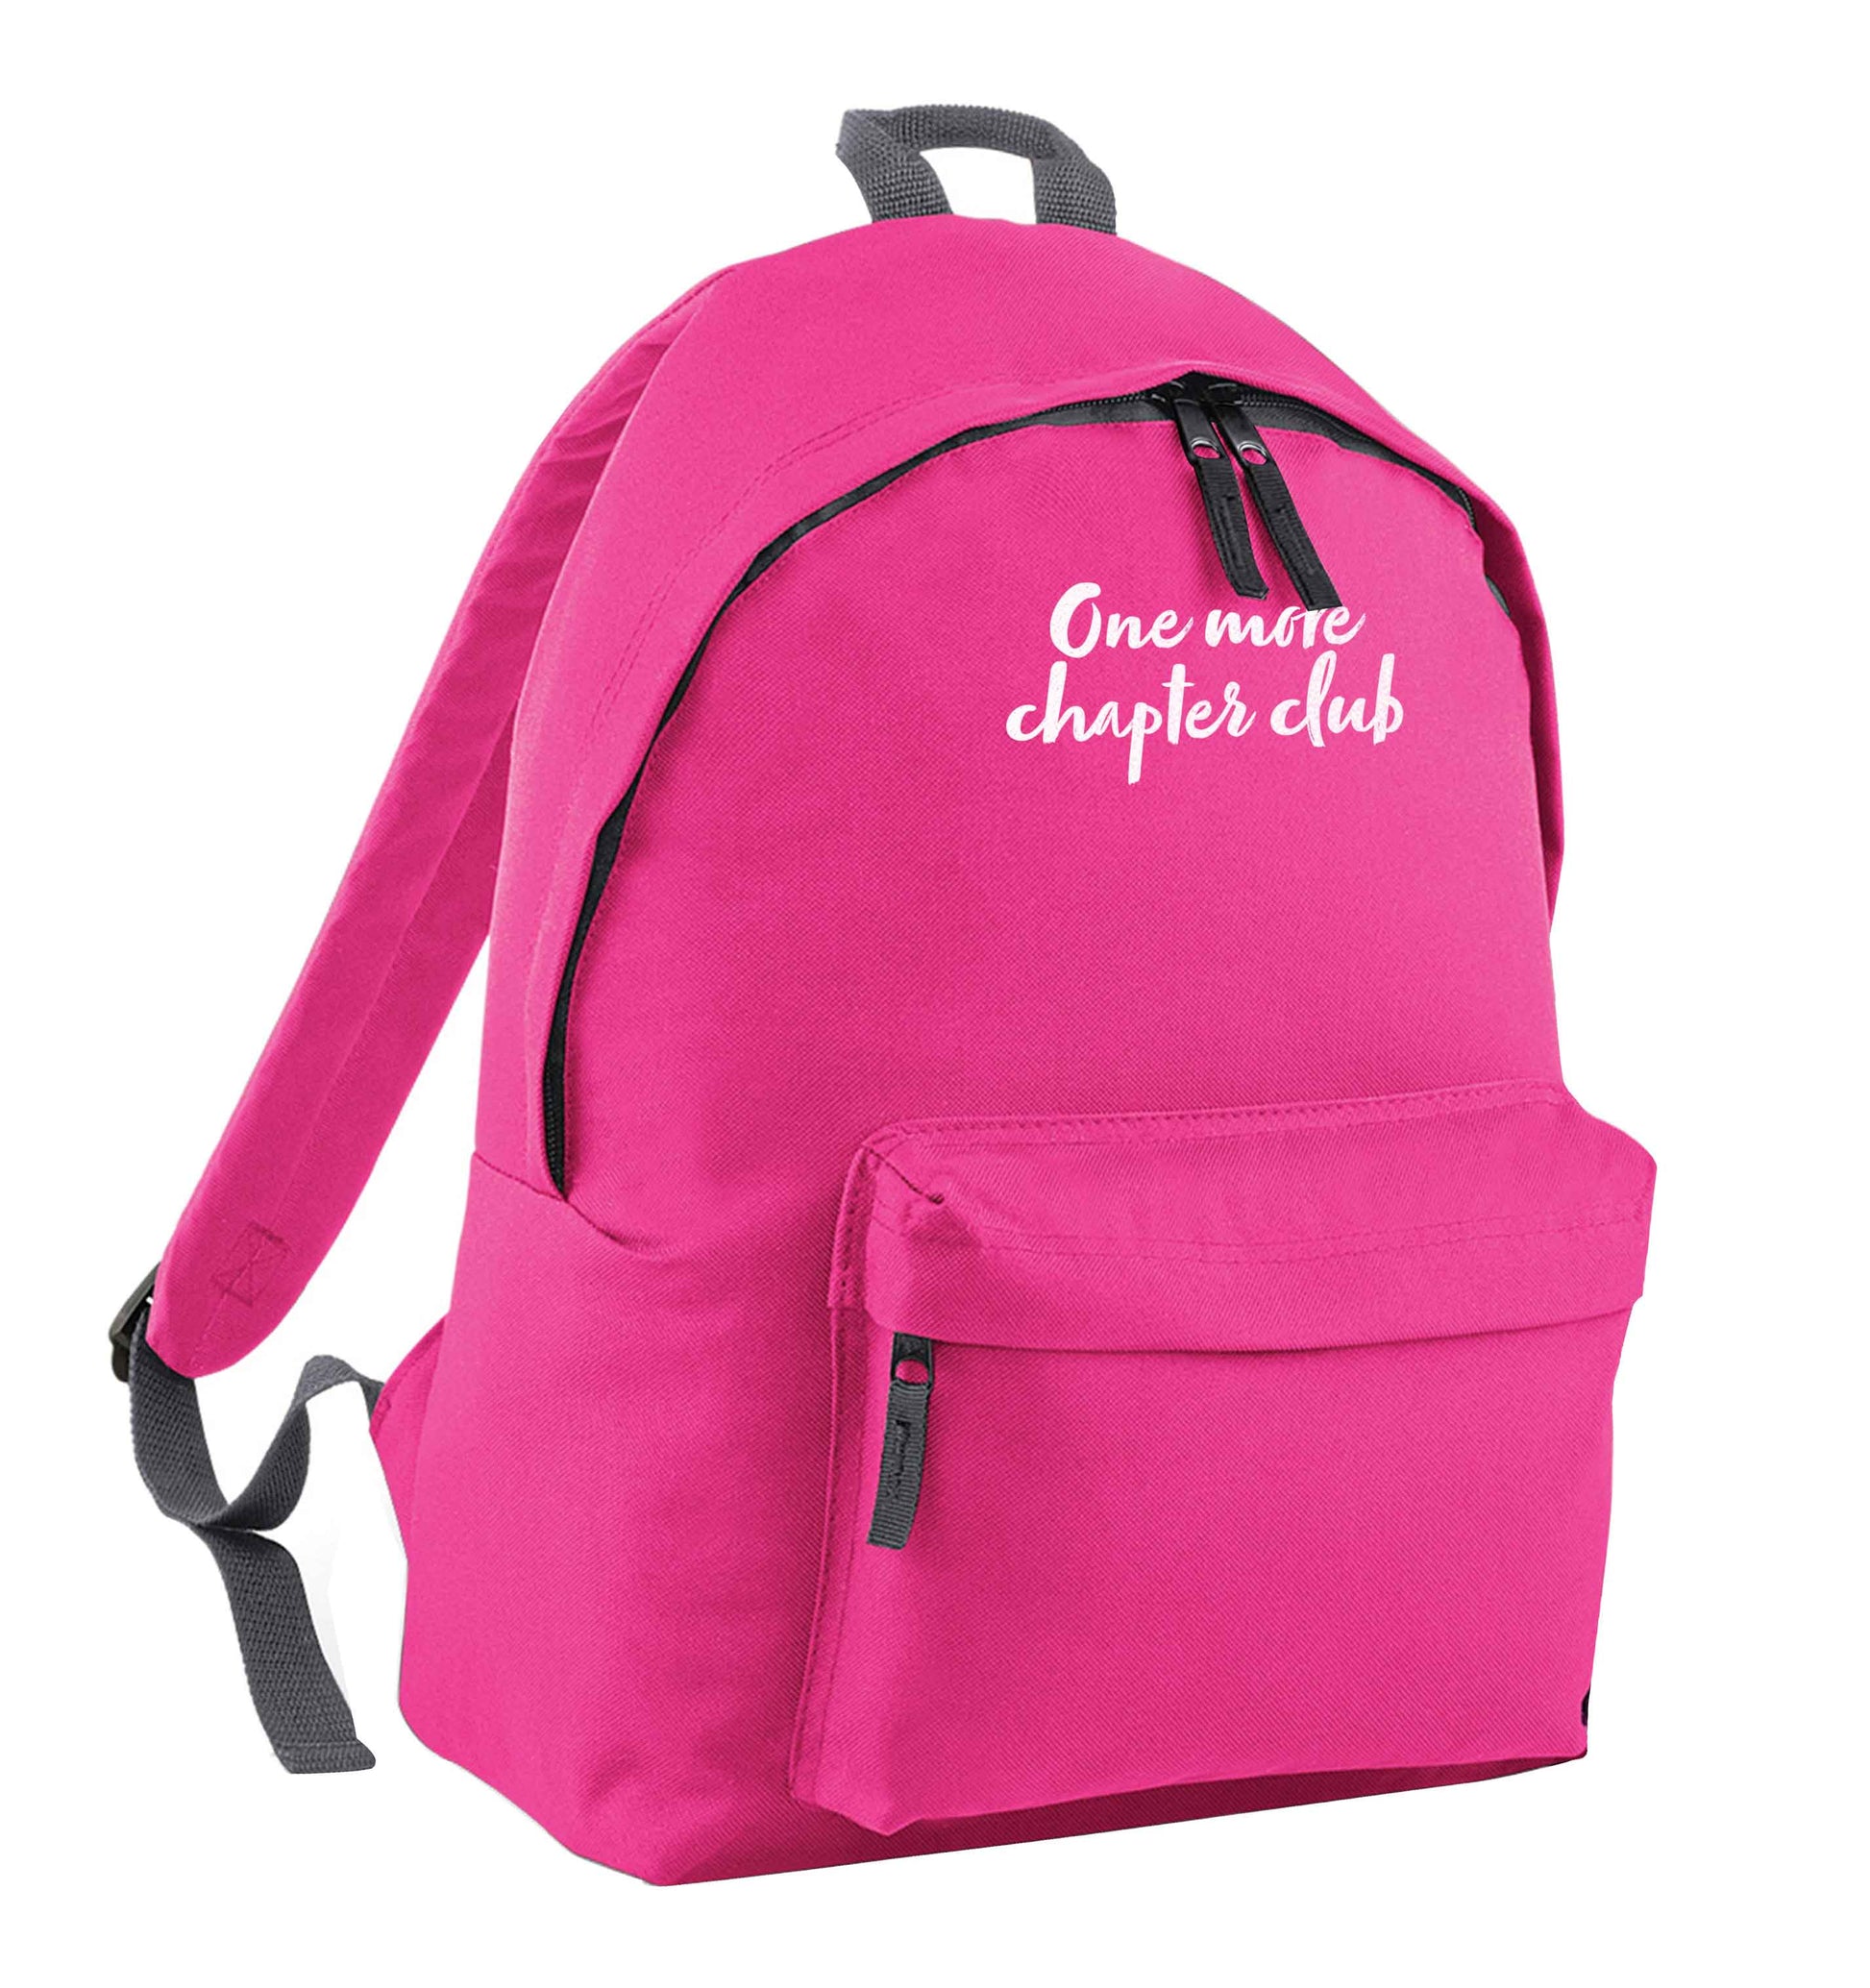 One more chapter club Kit pink children's backpack